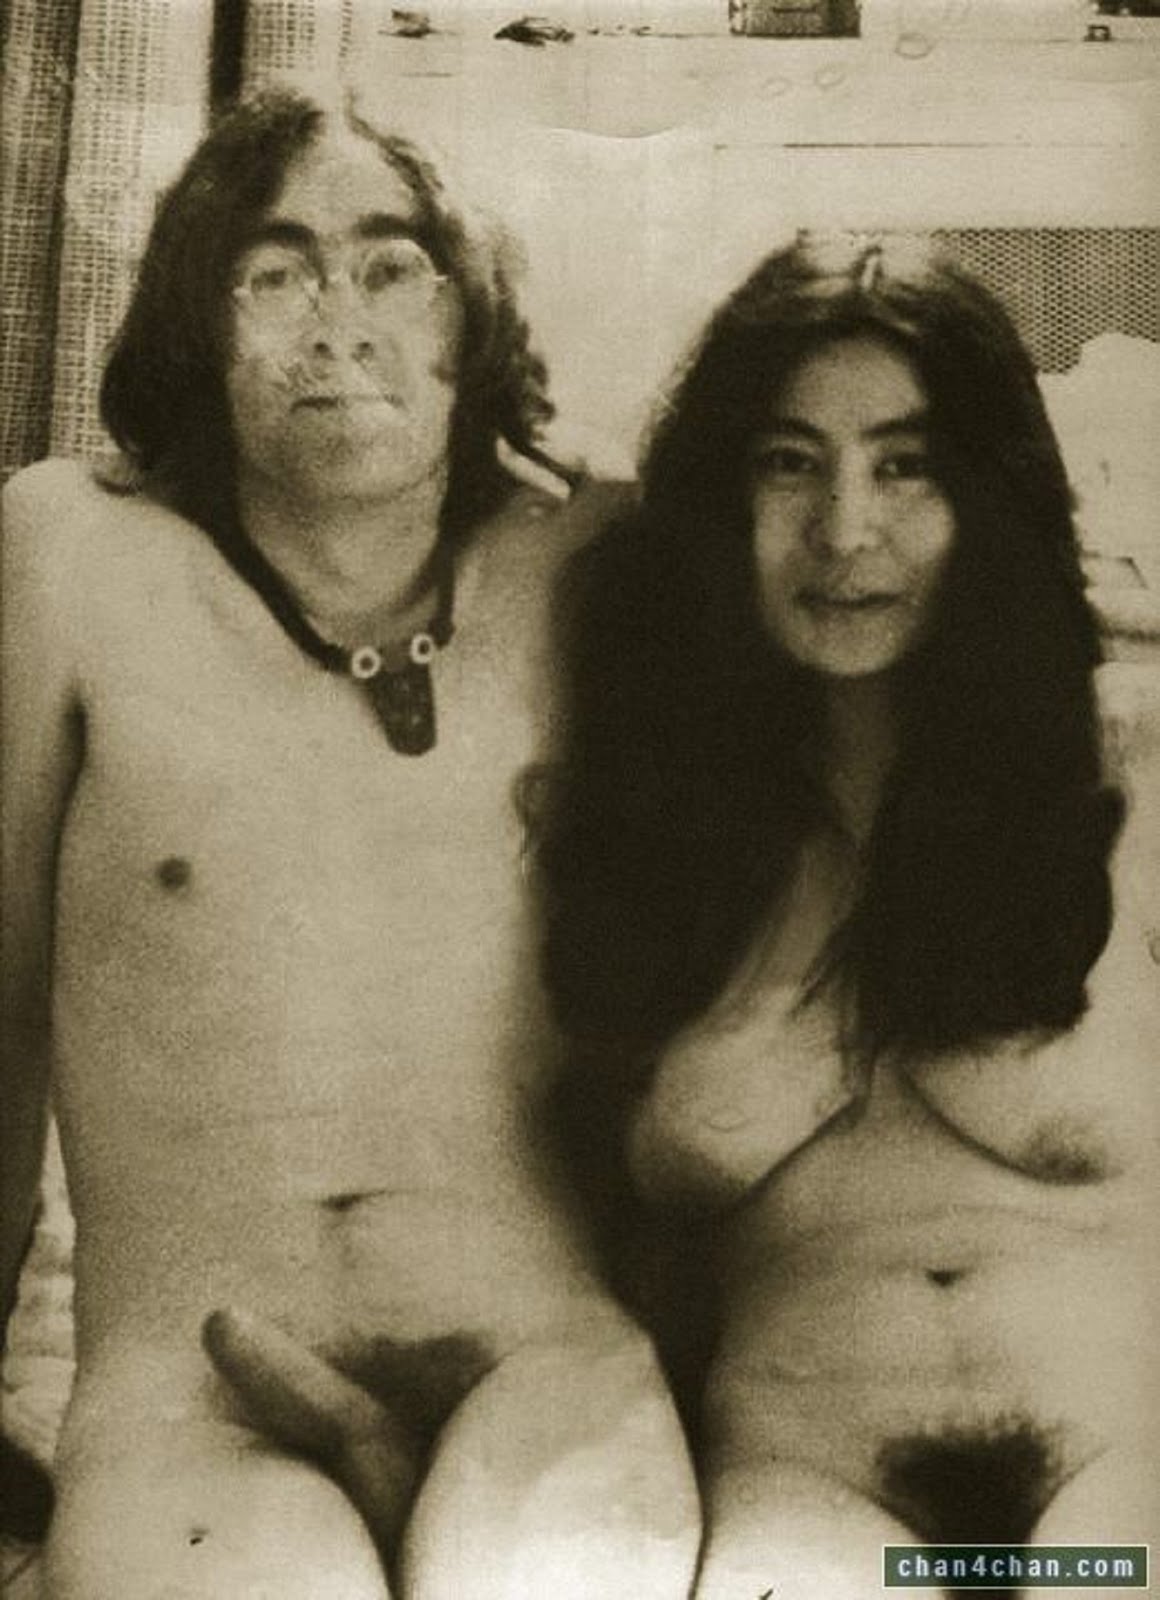 BEATLE JOHN LENNON AND YOKO ONO'S HONEYMOON PICTURE AT AMSTERDAM. HOLLAND MARCH OF 1969 -